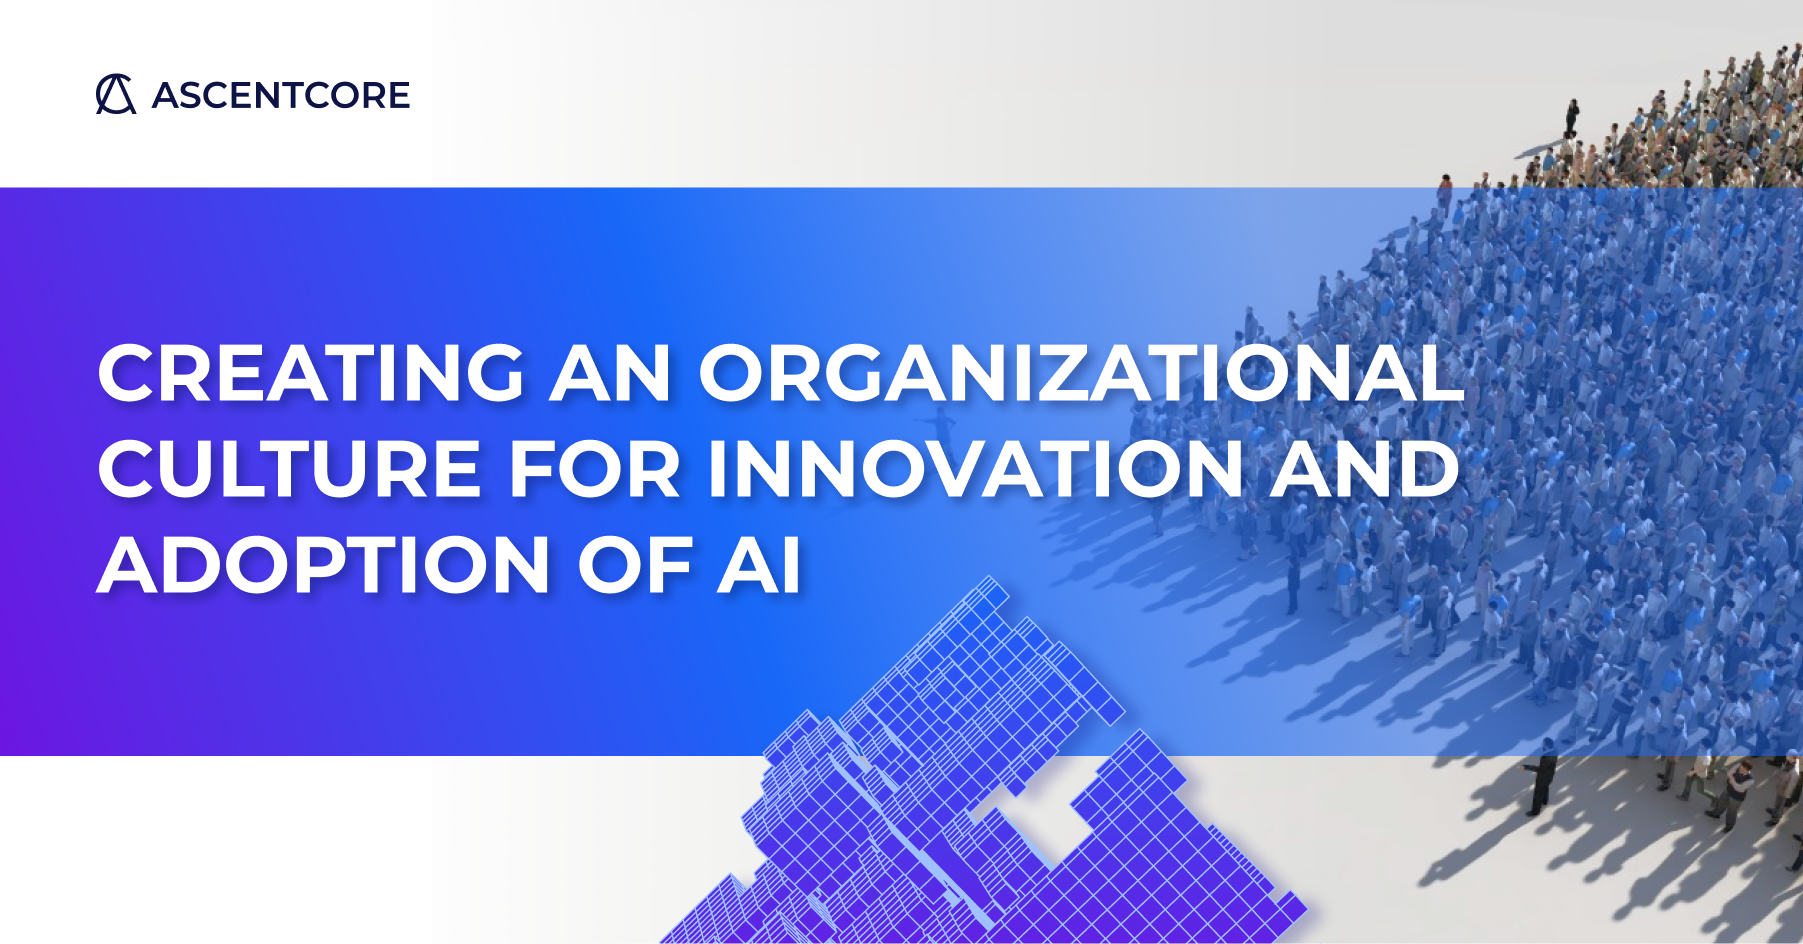 AscentCore - Creating an organizational culture for innovation and adoption of AI